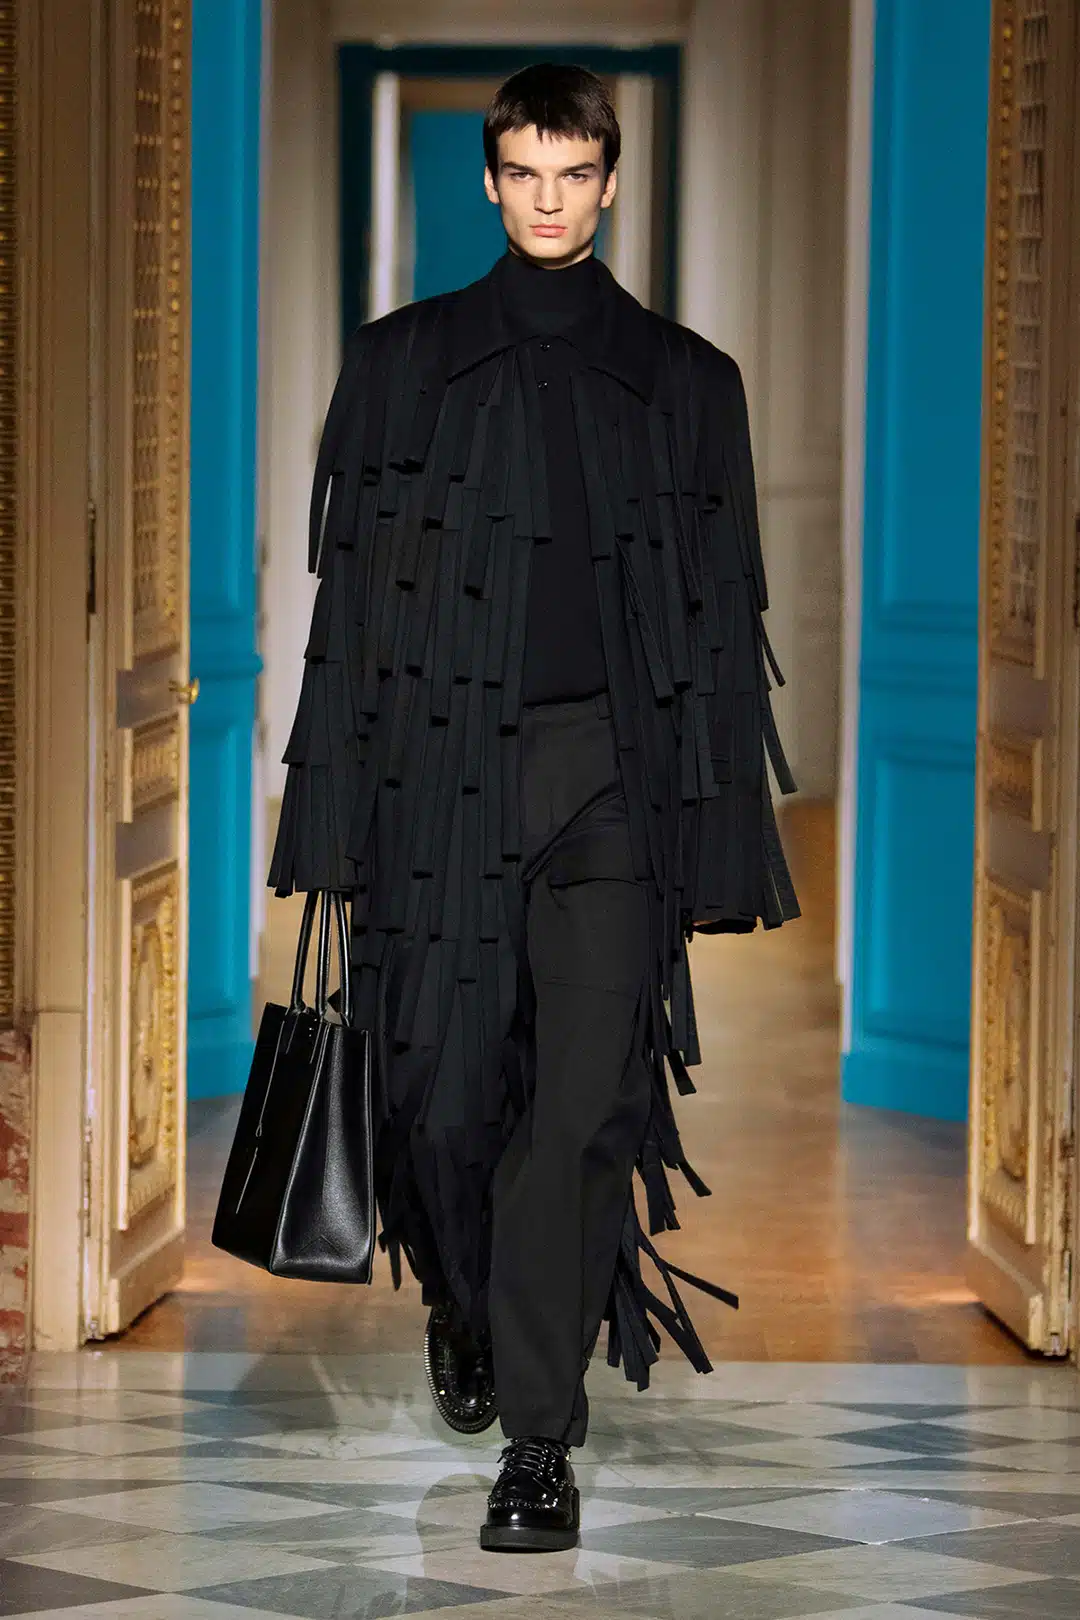 Valentino FW24 Men’s Collection Dismantles Toxic Masculinity